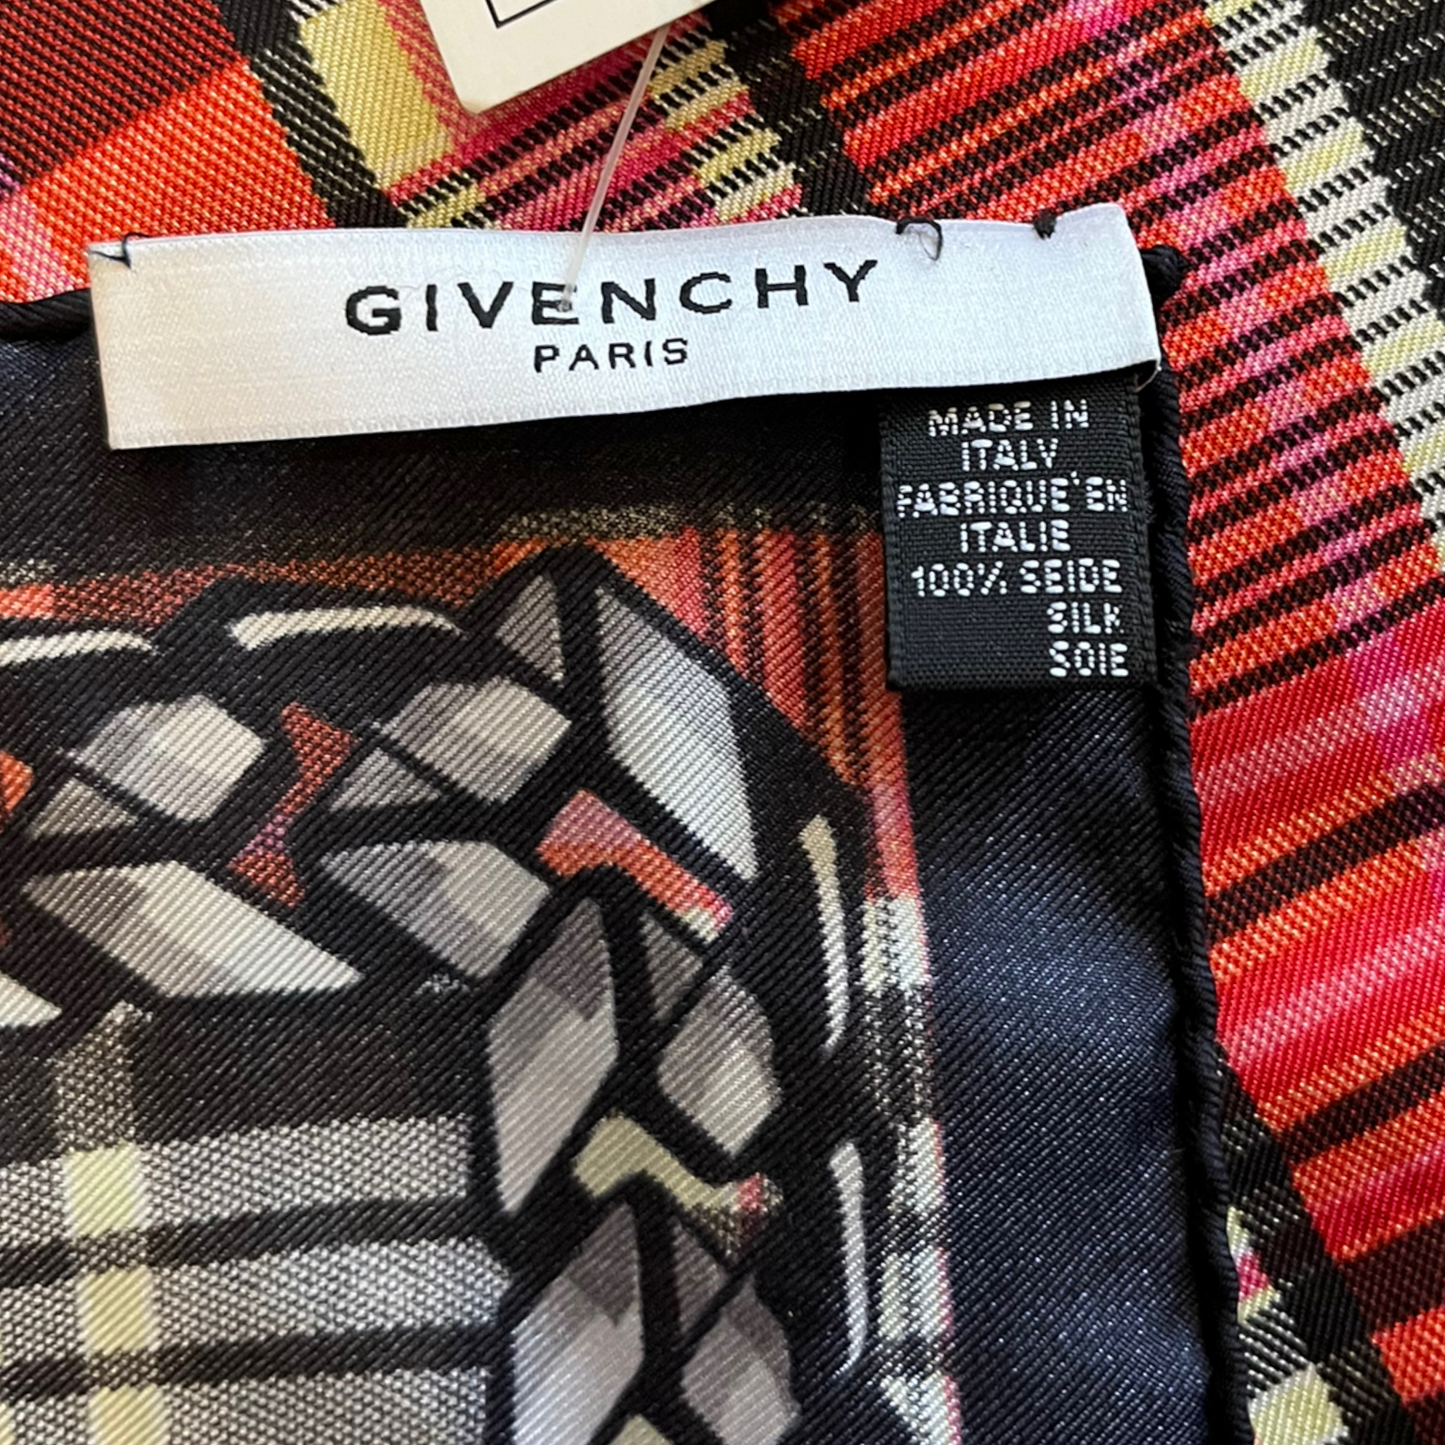 Givenchy Pink and Black Silk Scarf